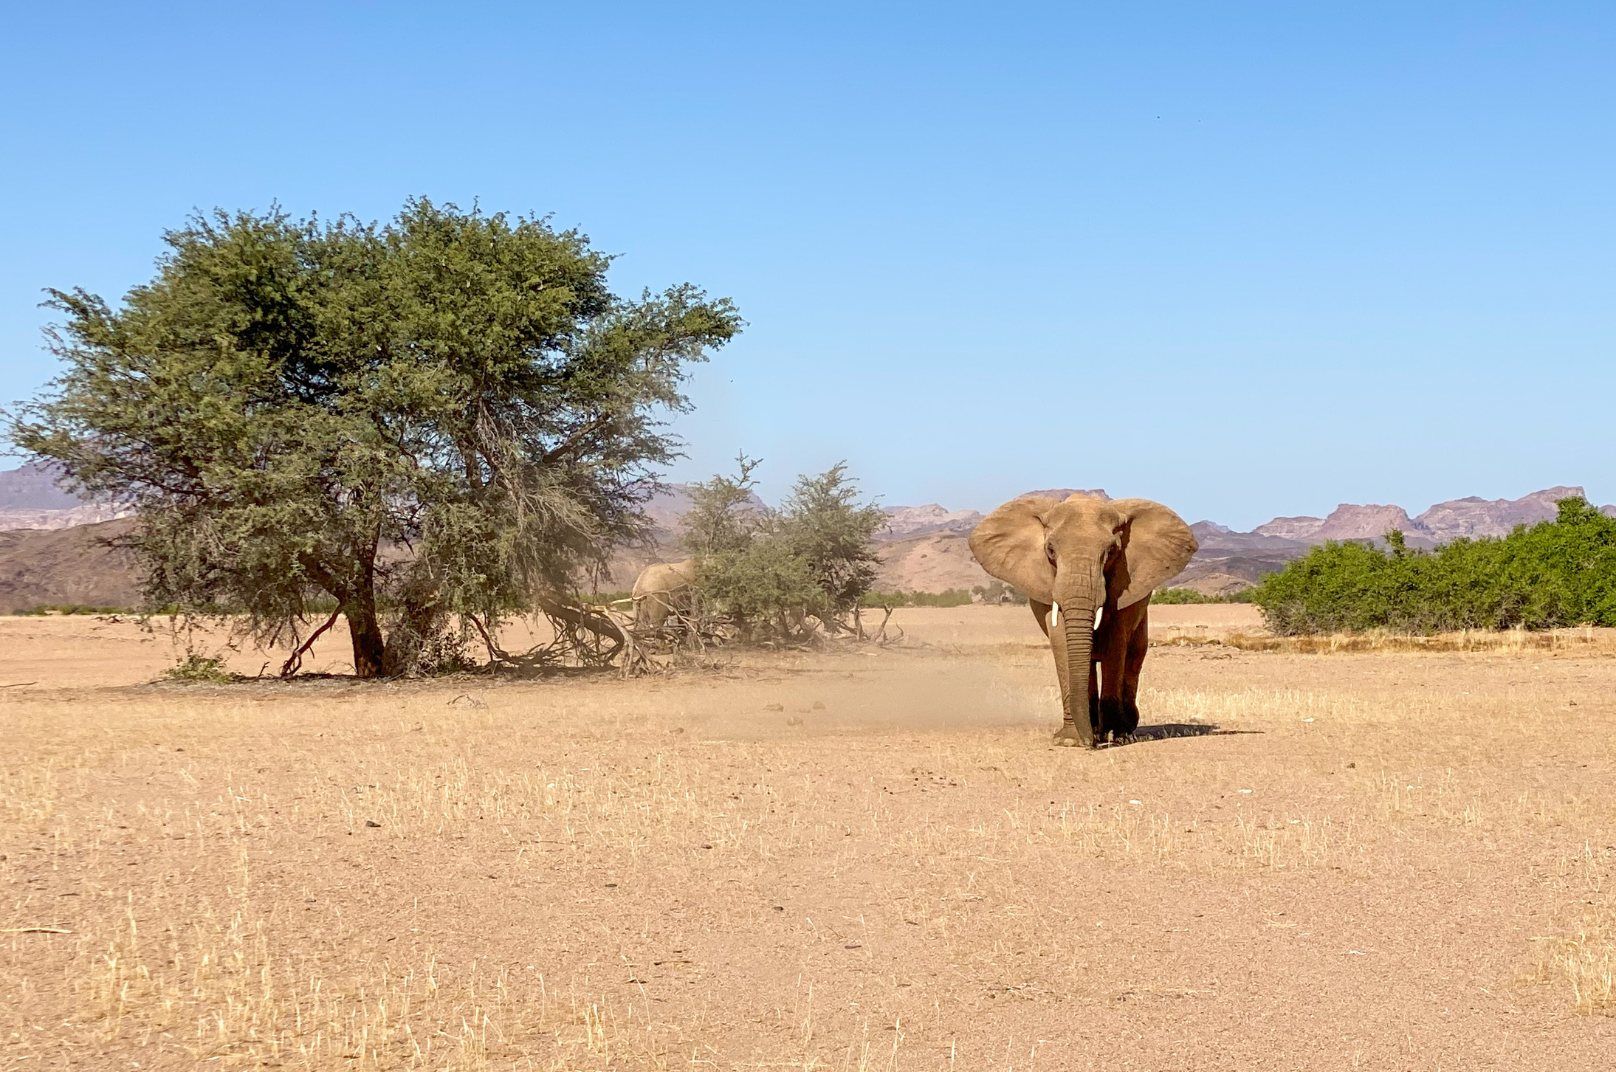 how to plan an ethical African safari